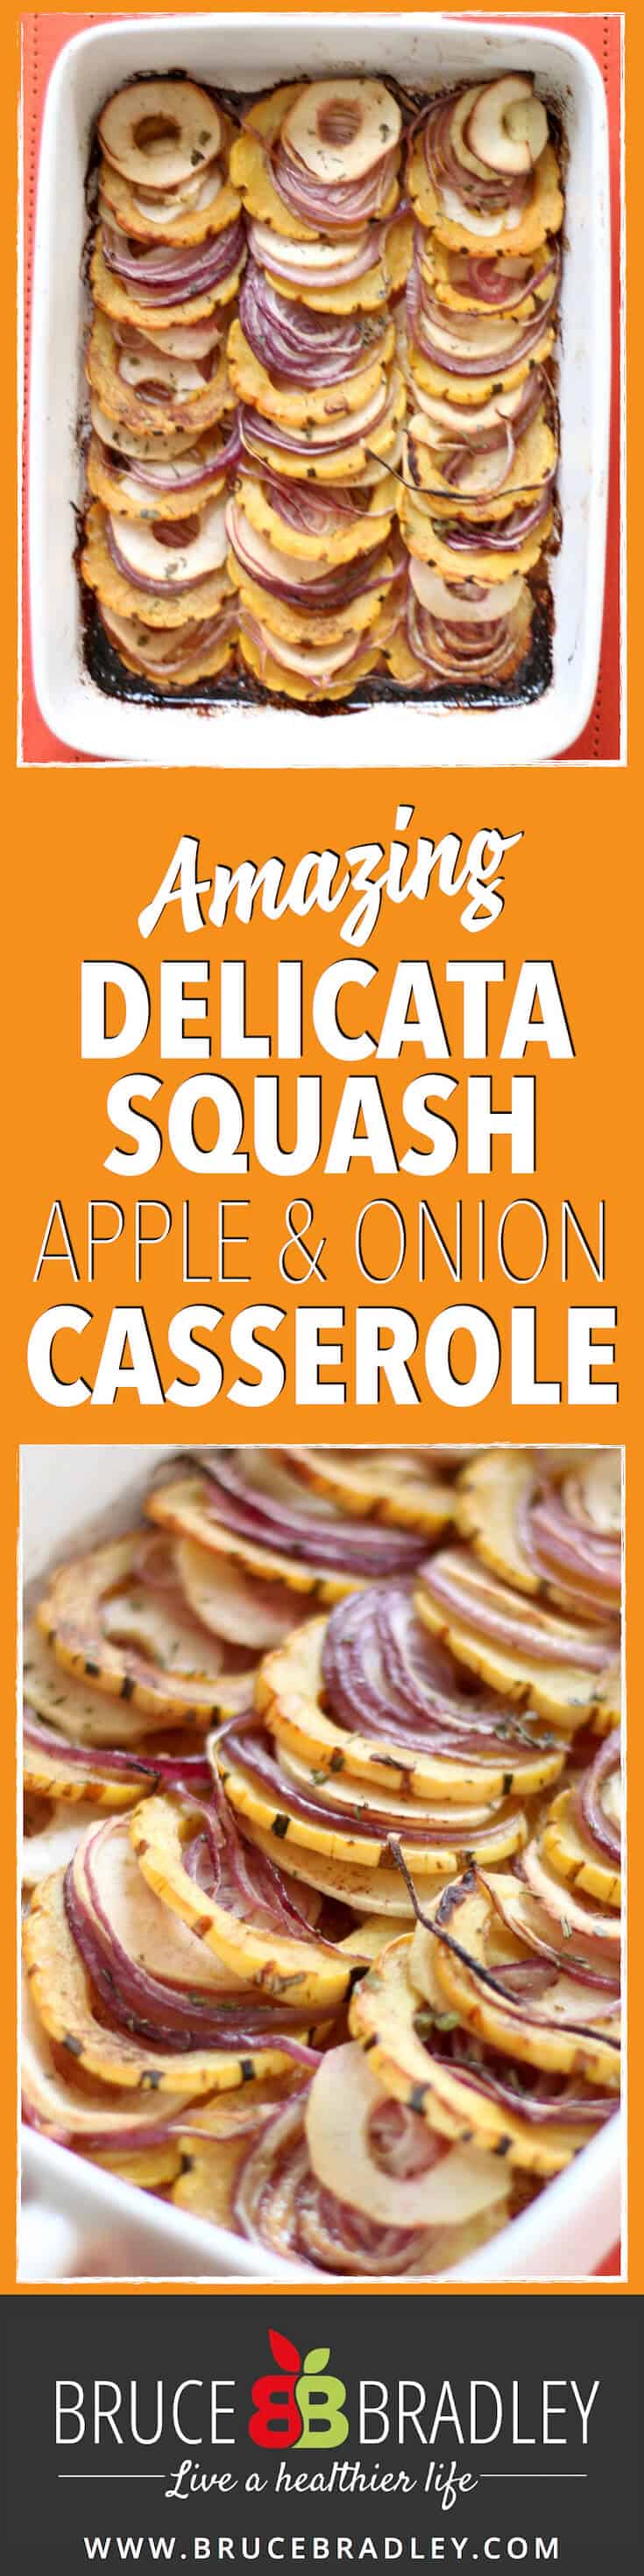 Replace Your Sugary Sweet Potato Casserole With A New Squash Side Dish That'S An Easy, Delicious Addition For Your Thanksgiving! This Amazing Delicata Squash Tian With Apples And Onions Is Sure To Become A Holiday Favorite!